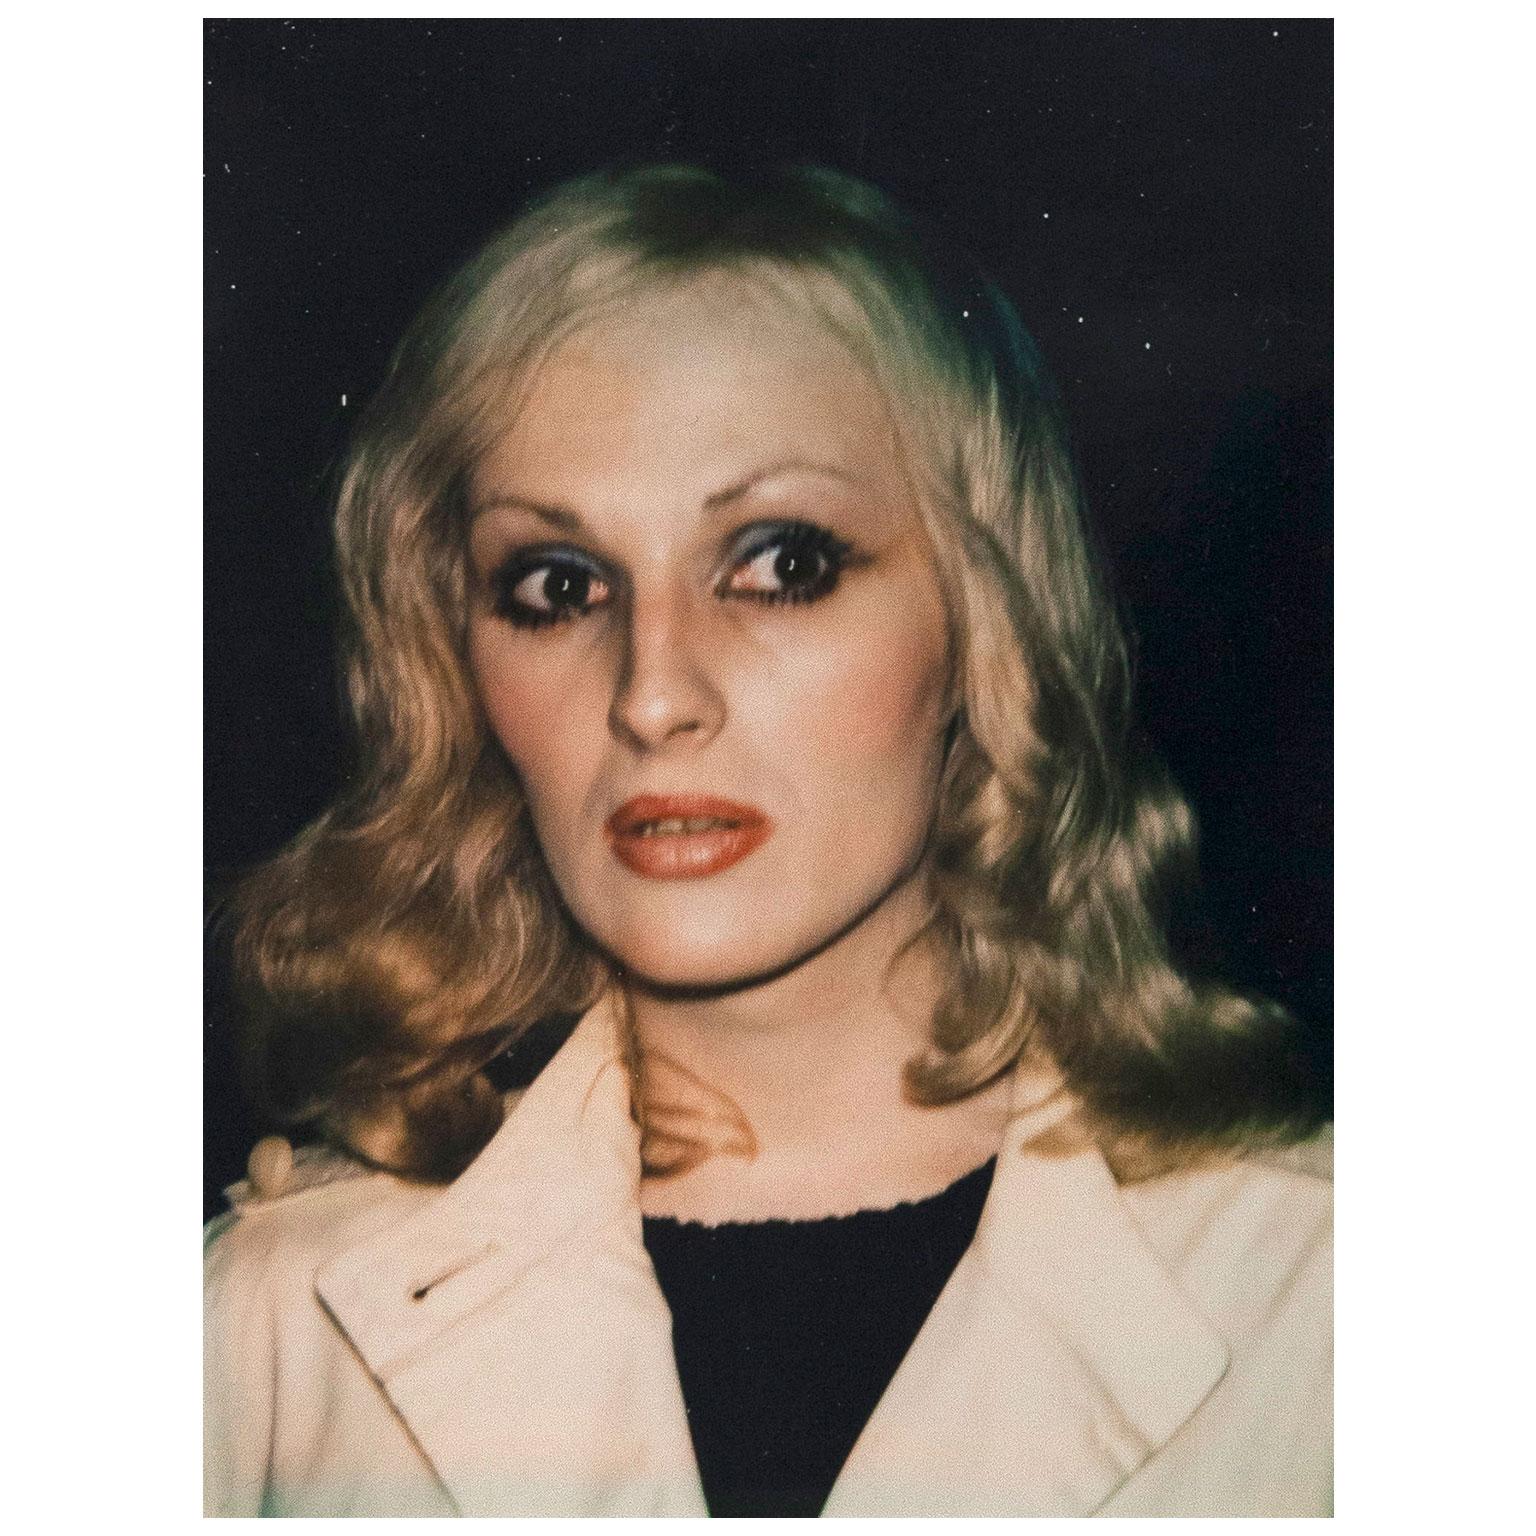 Andy Warhol began using the big-shot Polaroid camera in 1971, and continued using it religiously until his death in 1987. Despite the camera being discontinued in 1973,  he continued to use it to capture the actors, artists, clubbers, politicians,